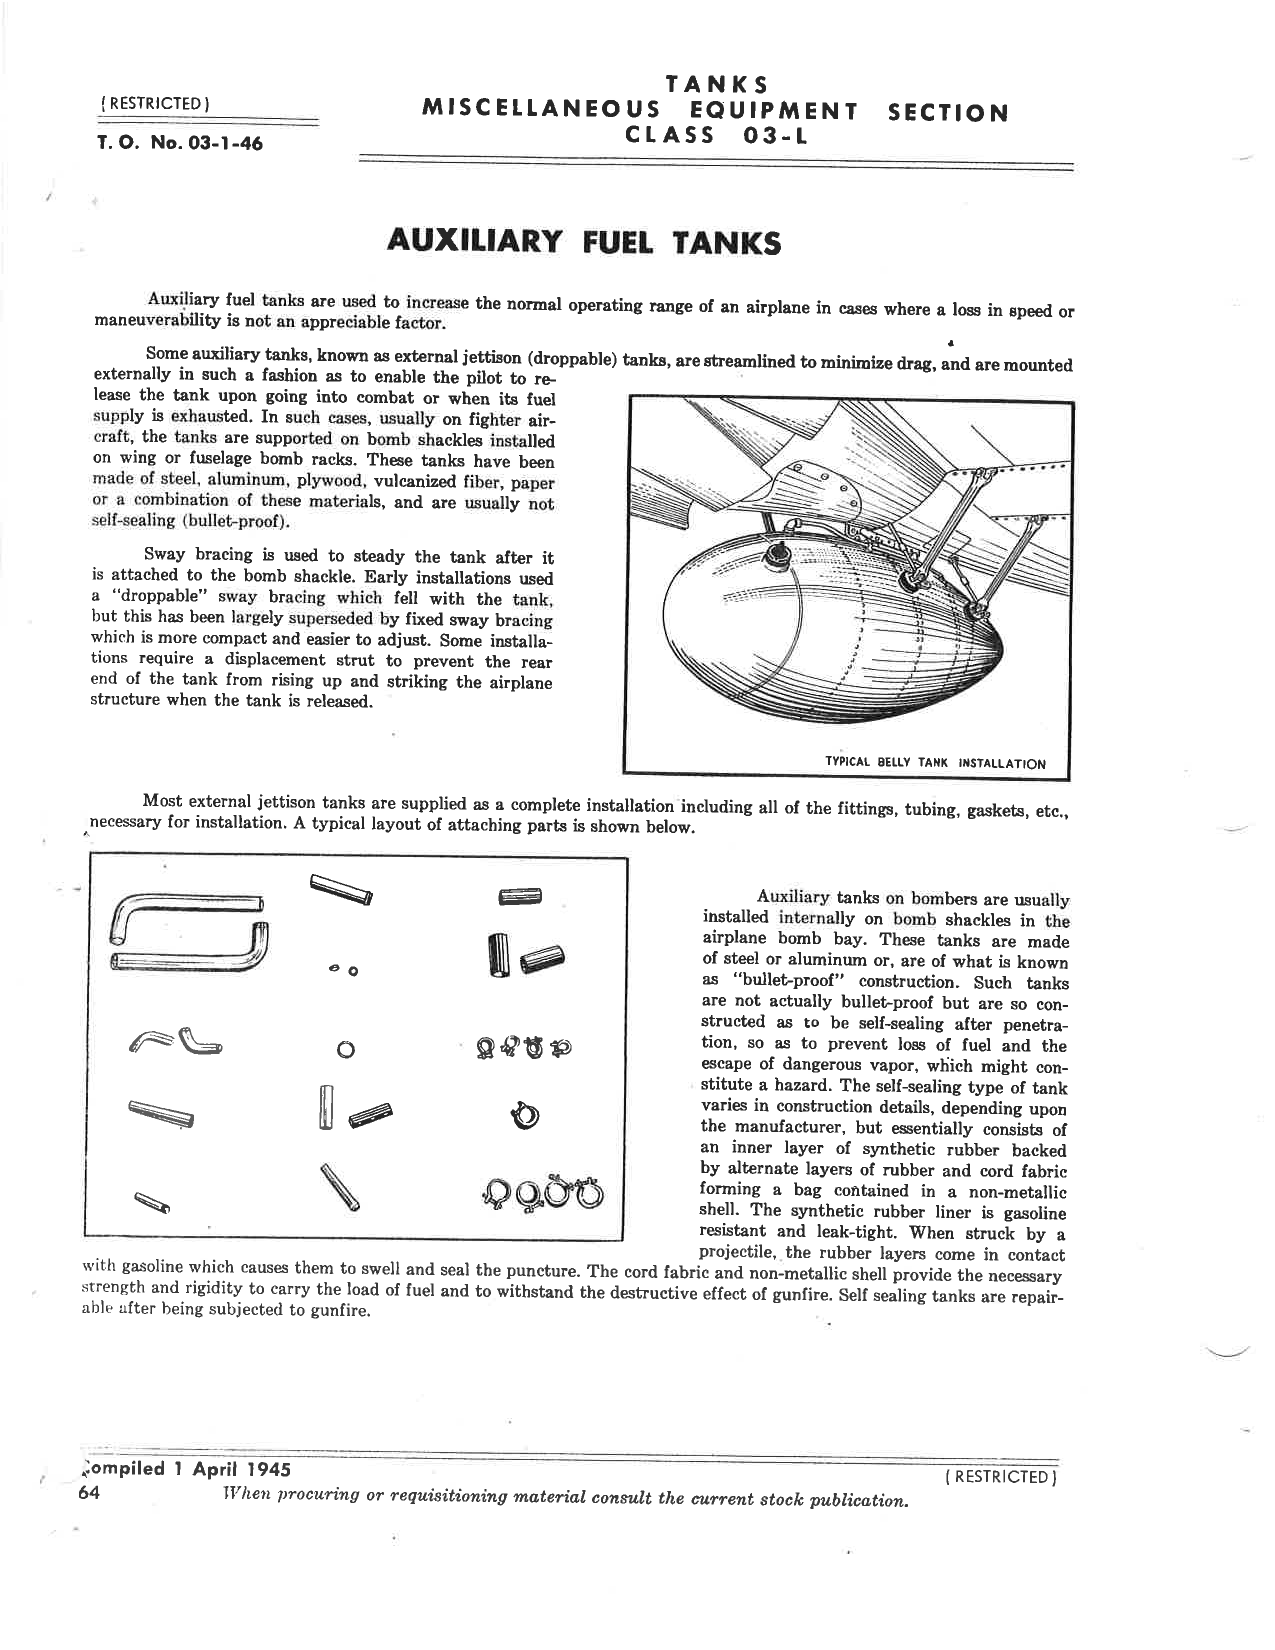 Sample page 1 from AirCorps Library document: Tanks - Misc Equipment Section - Class 03-L